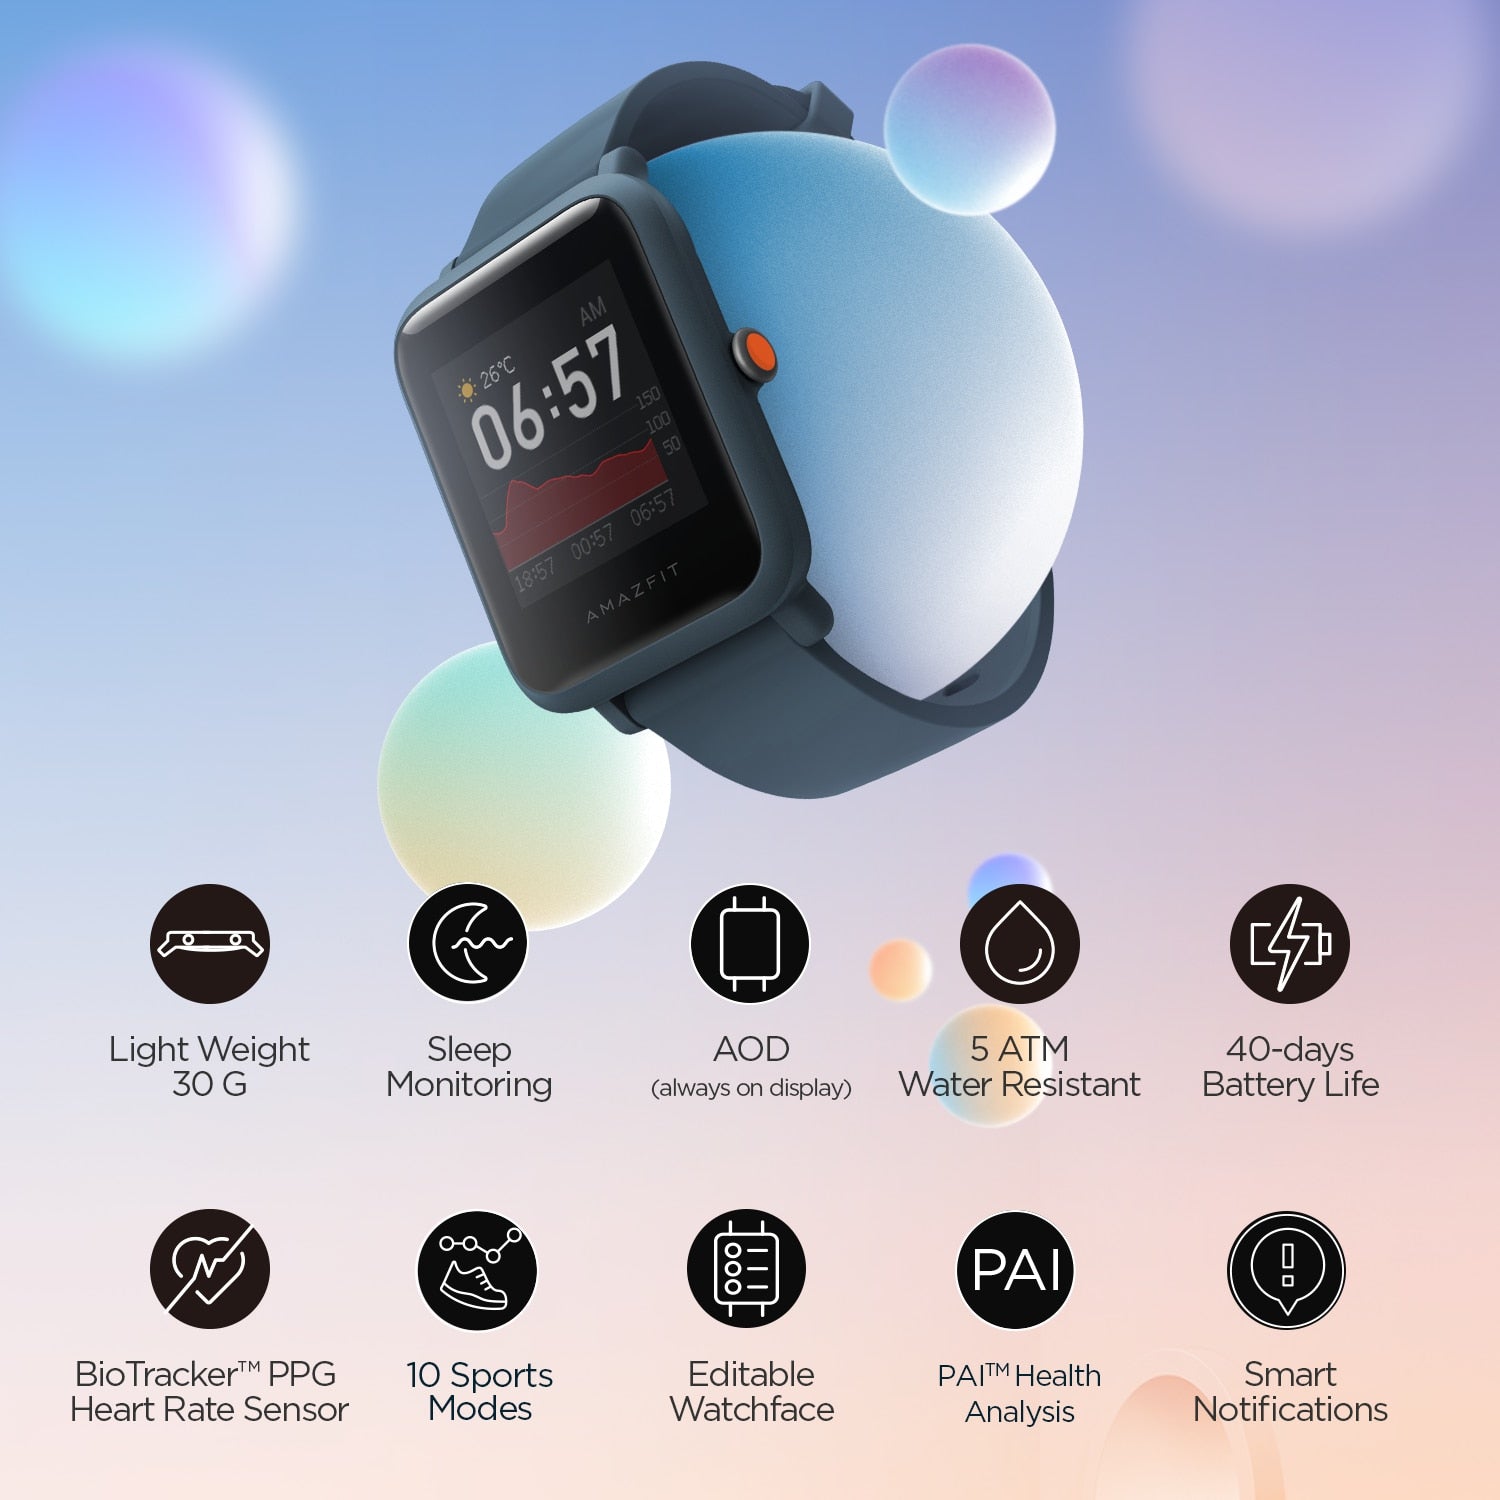 Global Version Amazfit Bip S Lite Smartwatch Color Display 5ATM Waterproof Swimming Smart Watch 1.28inch For Android ios Phone